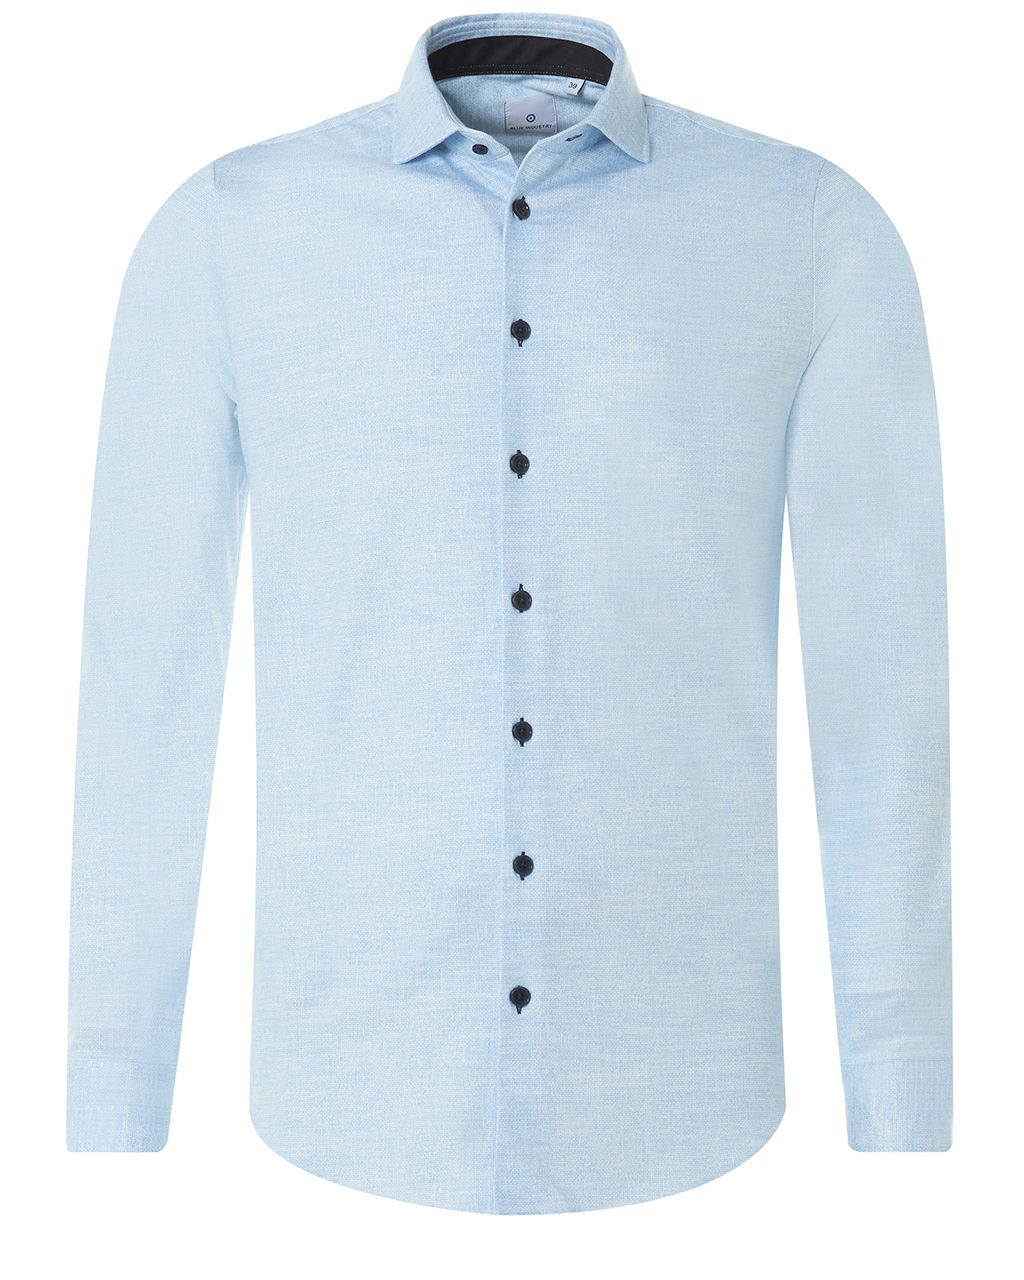 Blue Industry Casual Overhemd LM Blauw 078342-001-37